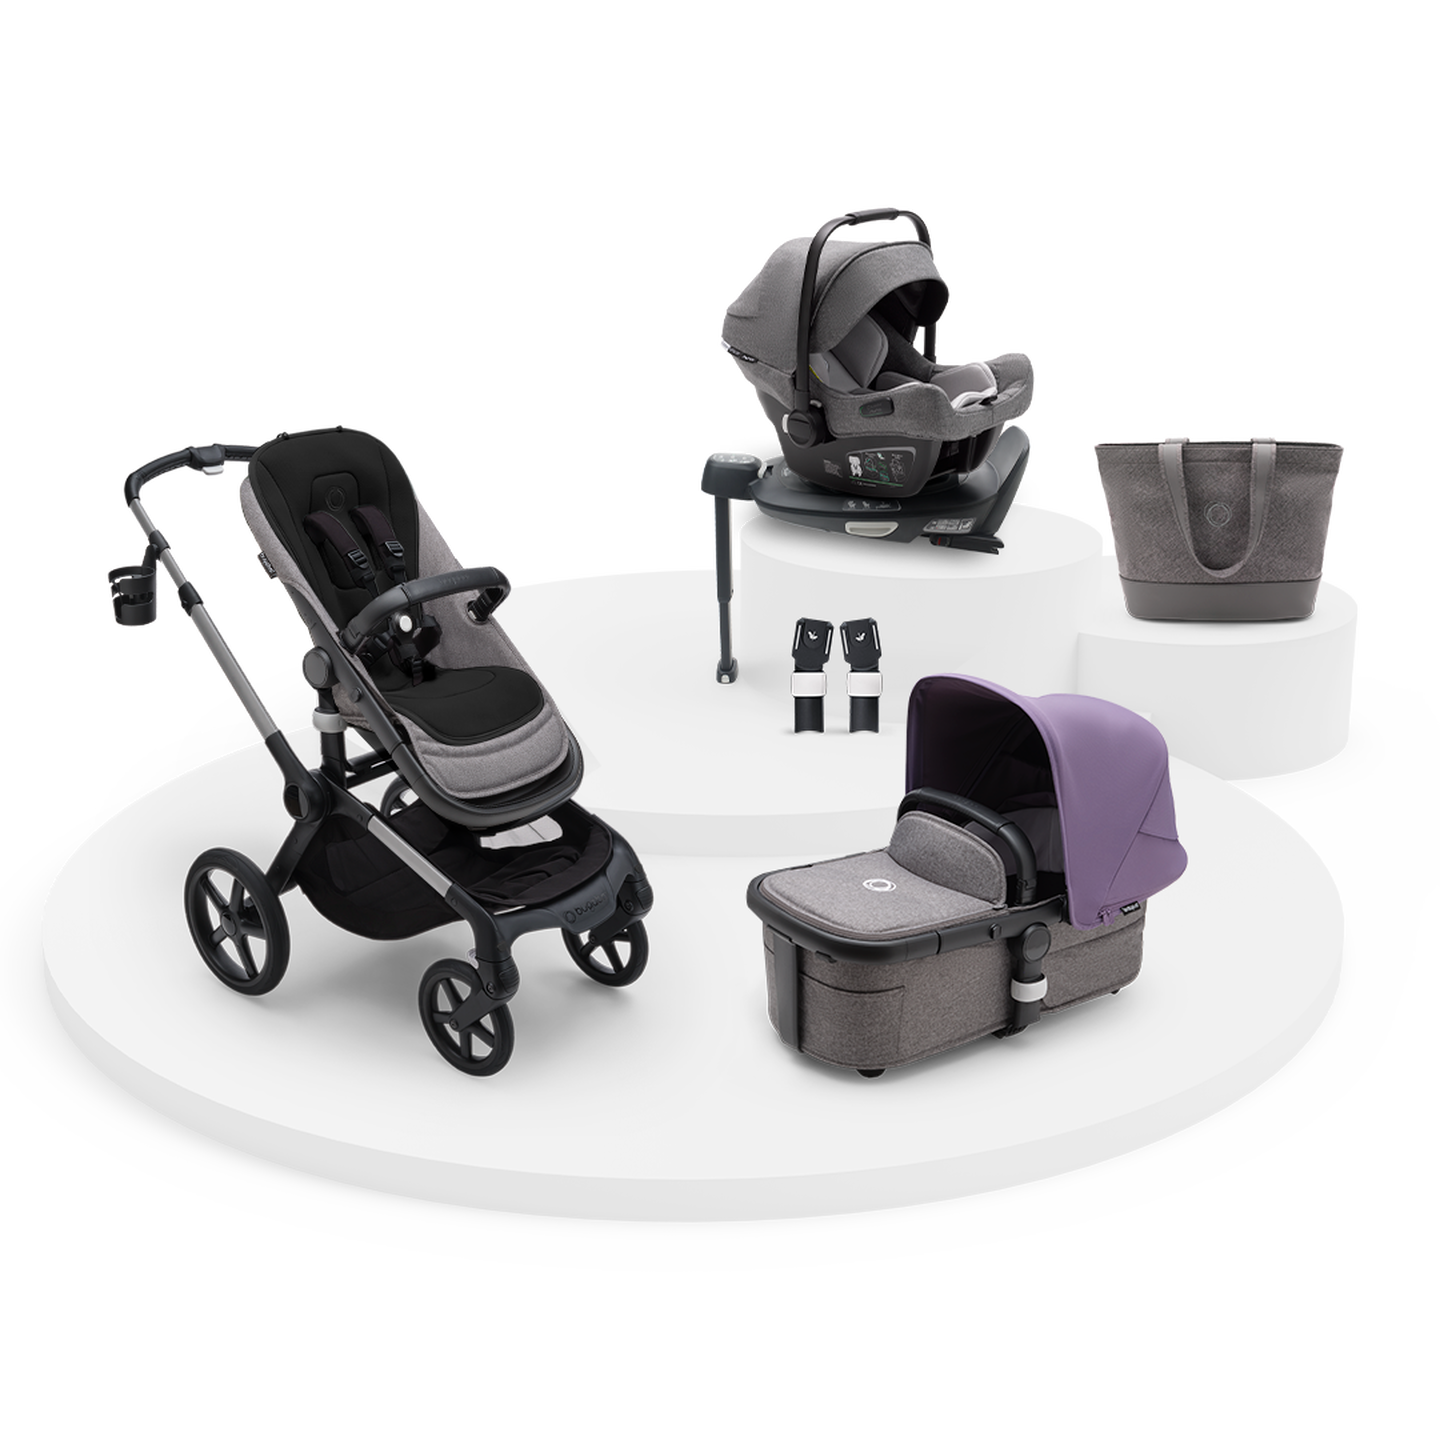 Bugaboo Dragonfly Bundle with footmuff and rain cover